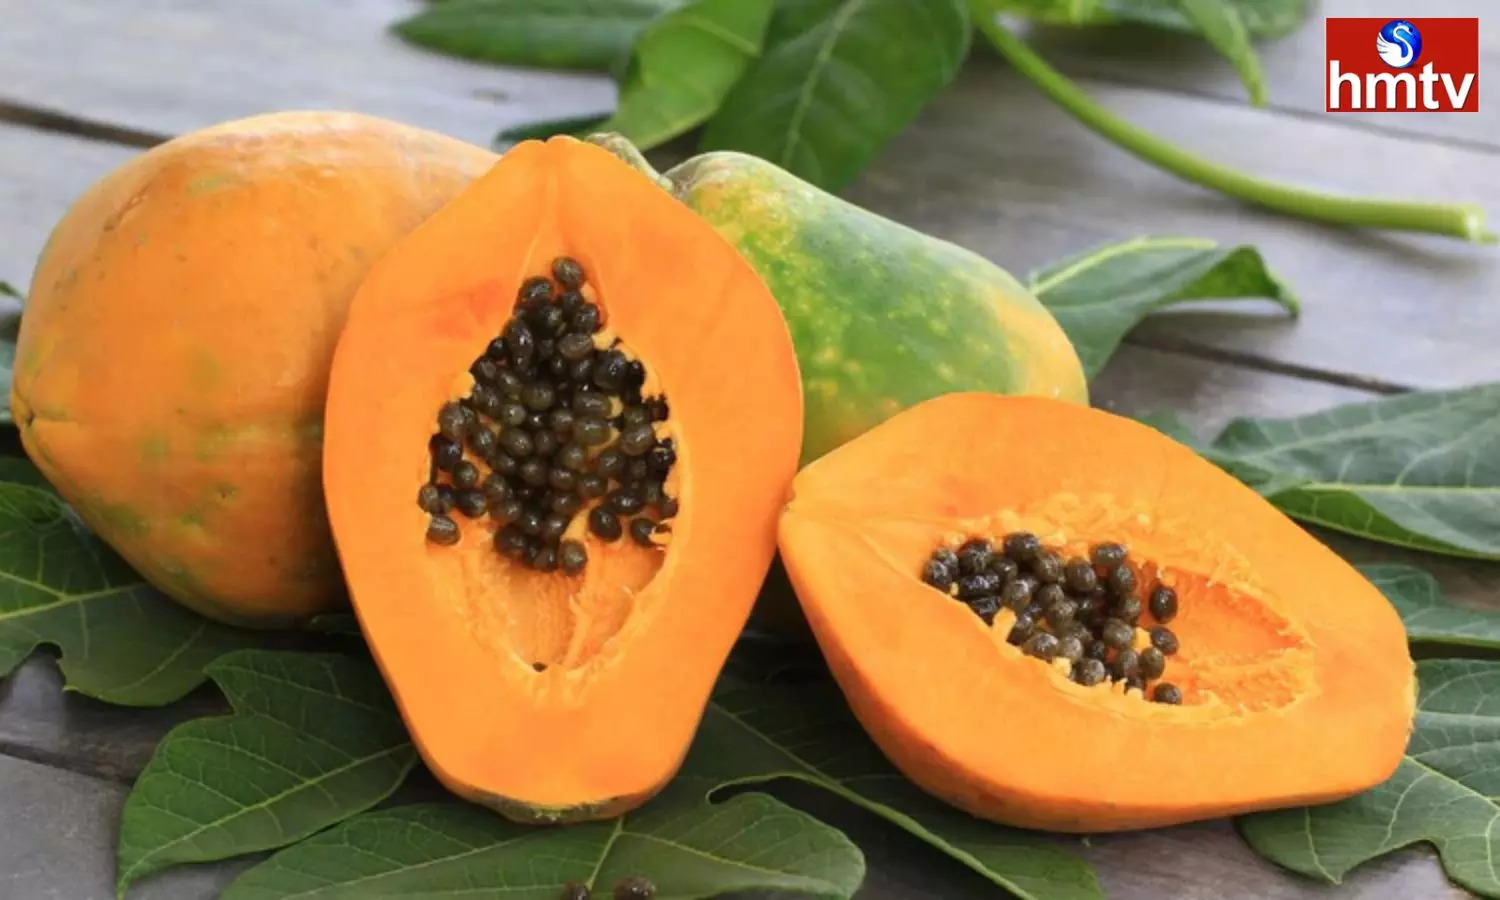 Eating Papaya On An Empty Stomach Gives These Benefits But Diabetic Patients Should Not Eat It